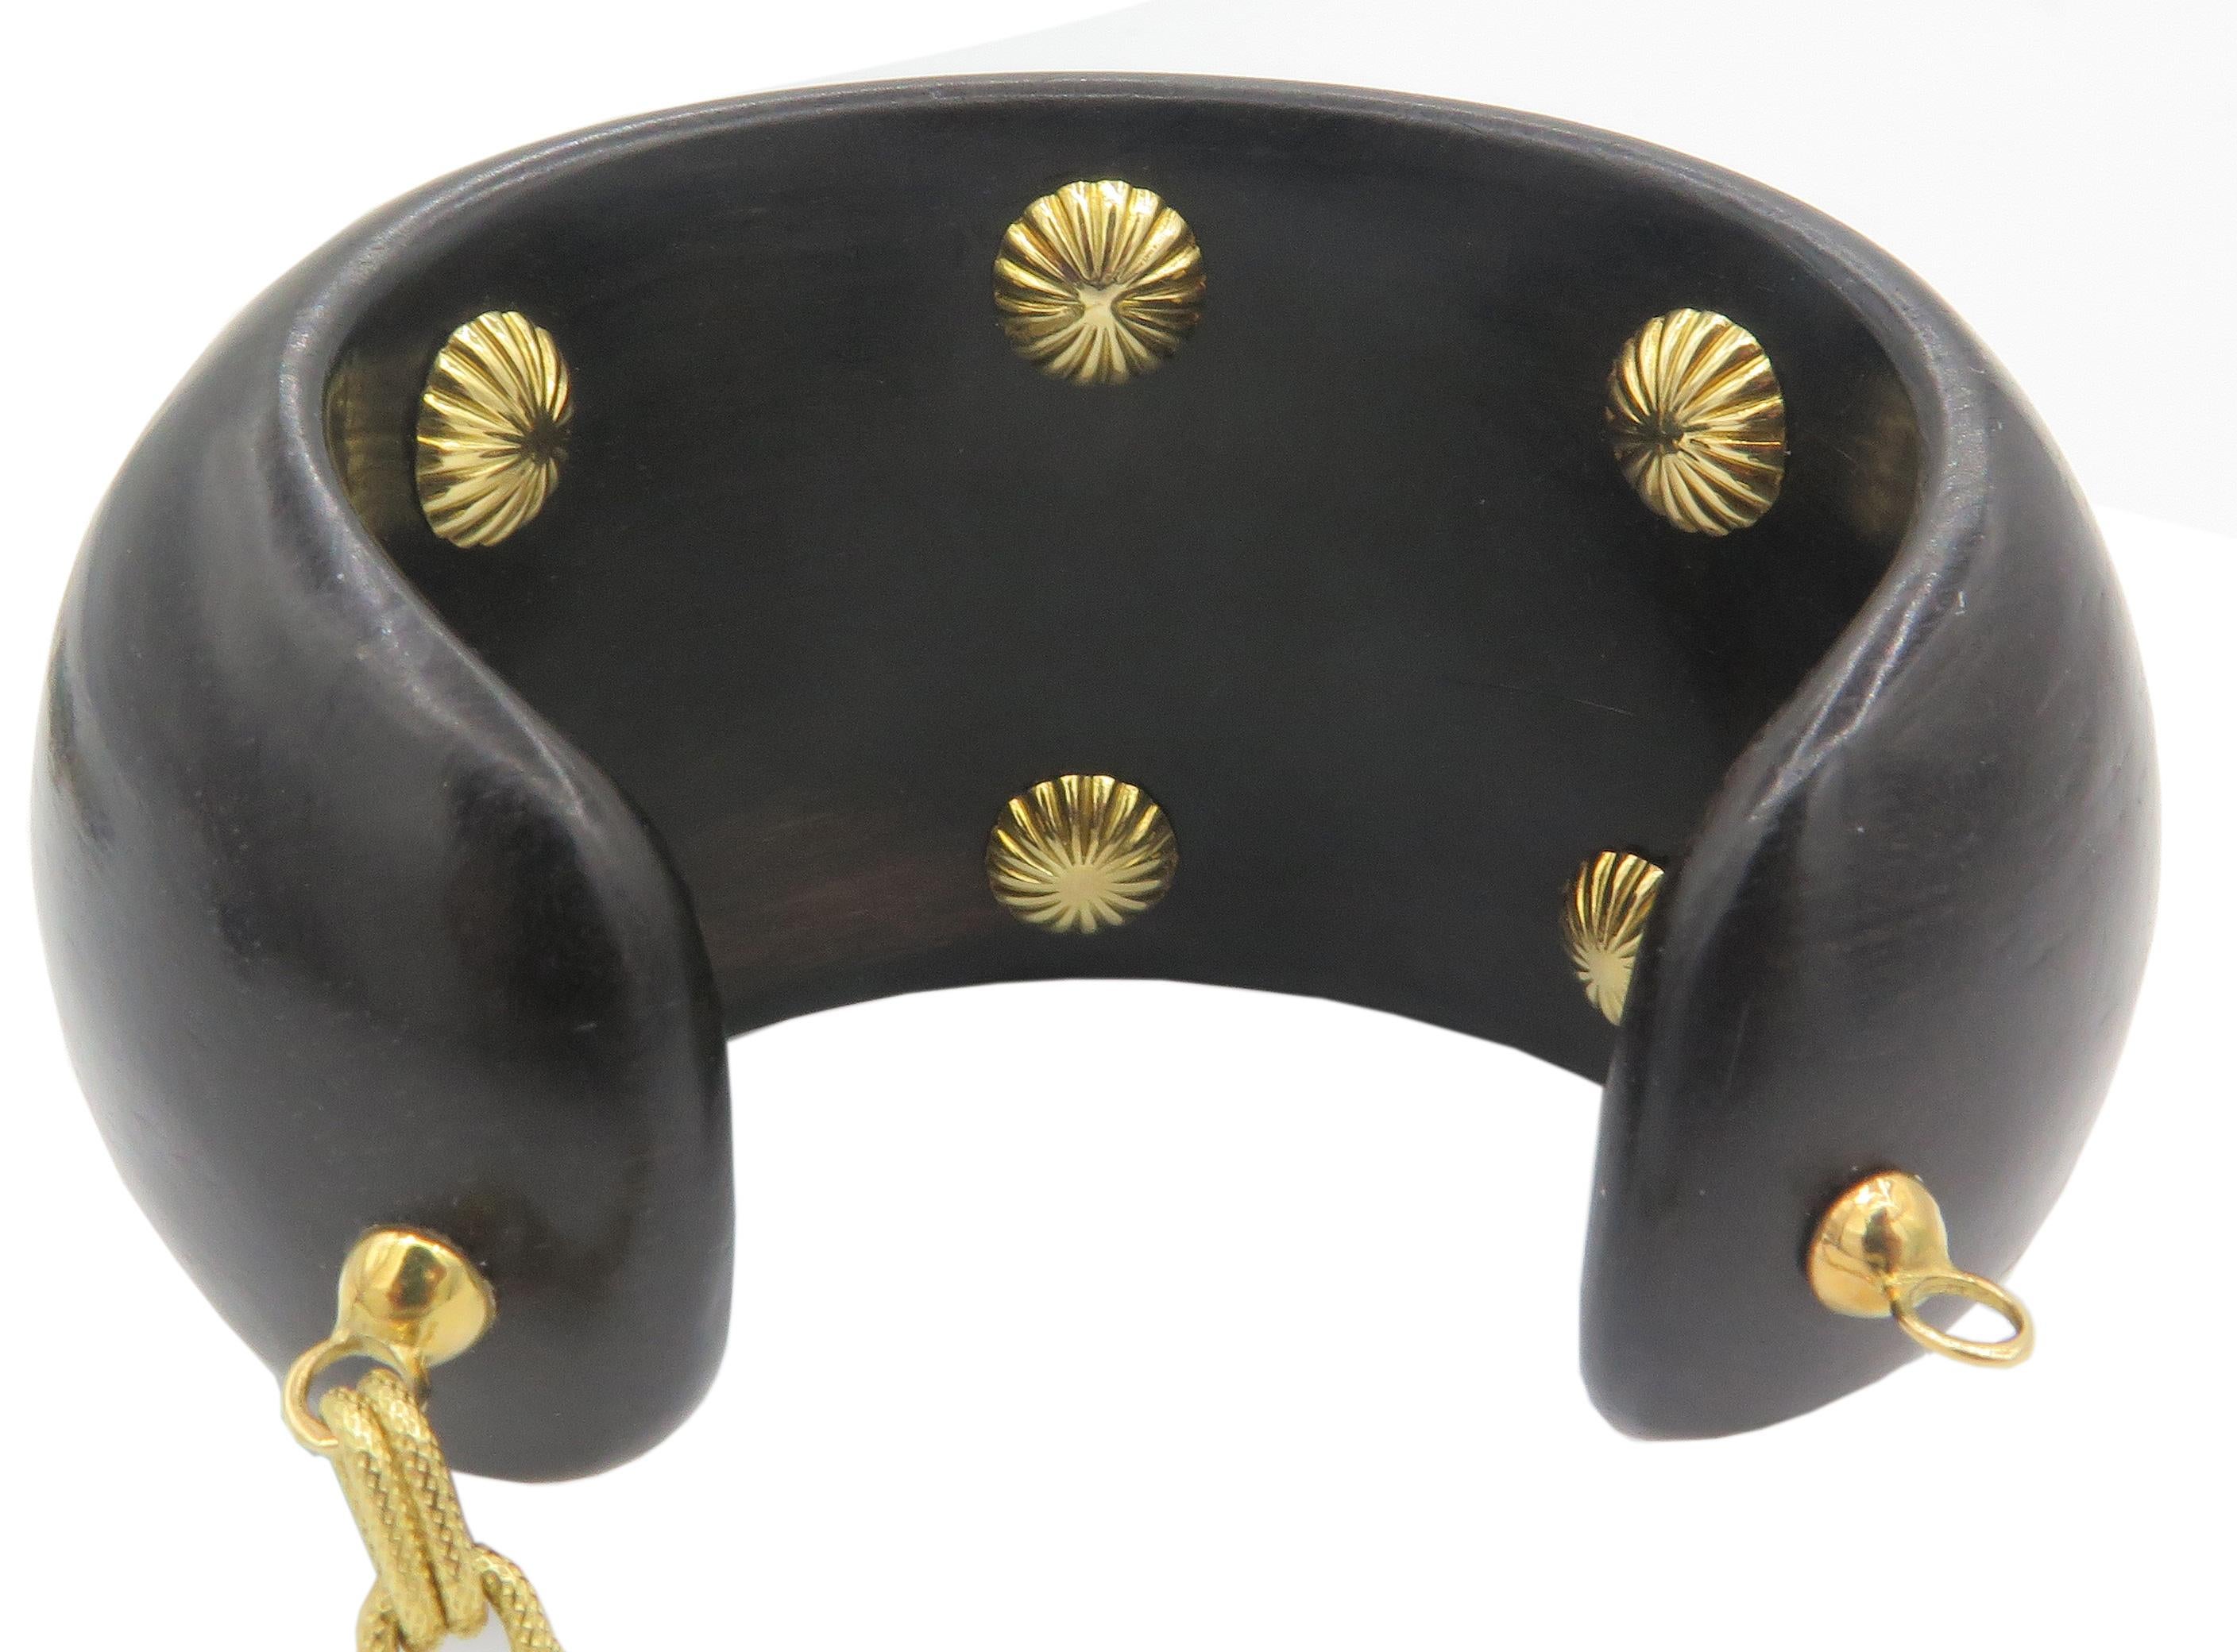 Beautiful, Ebony 18K yellow gold cuff bracelet. This beautiful bracelet is made out of Ebony, and features a cabochon Agate in the center mounted ontop of a 18K textured yellow gold bezel. The, bracelet includes a yellow gold chain link in the back